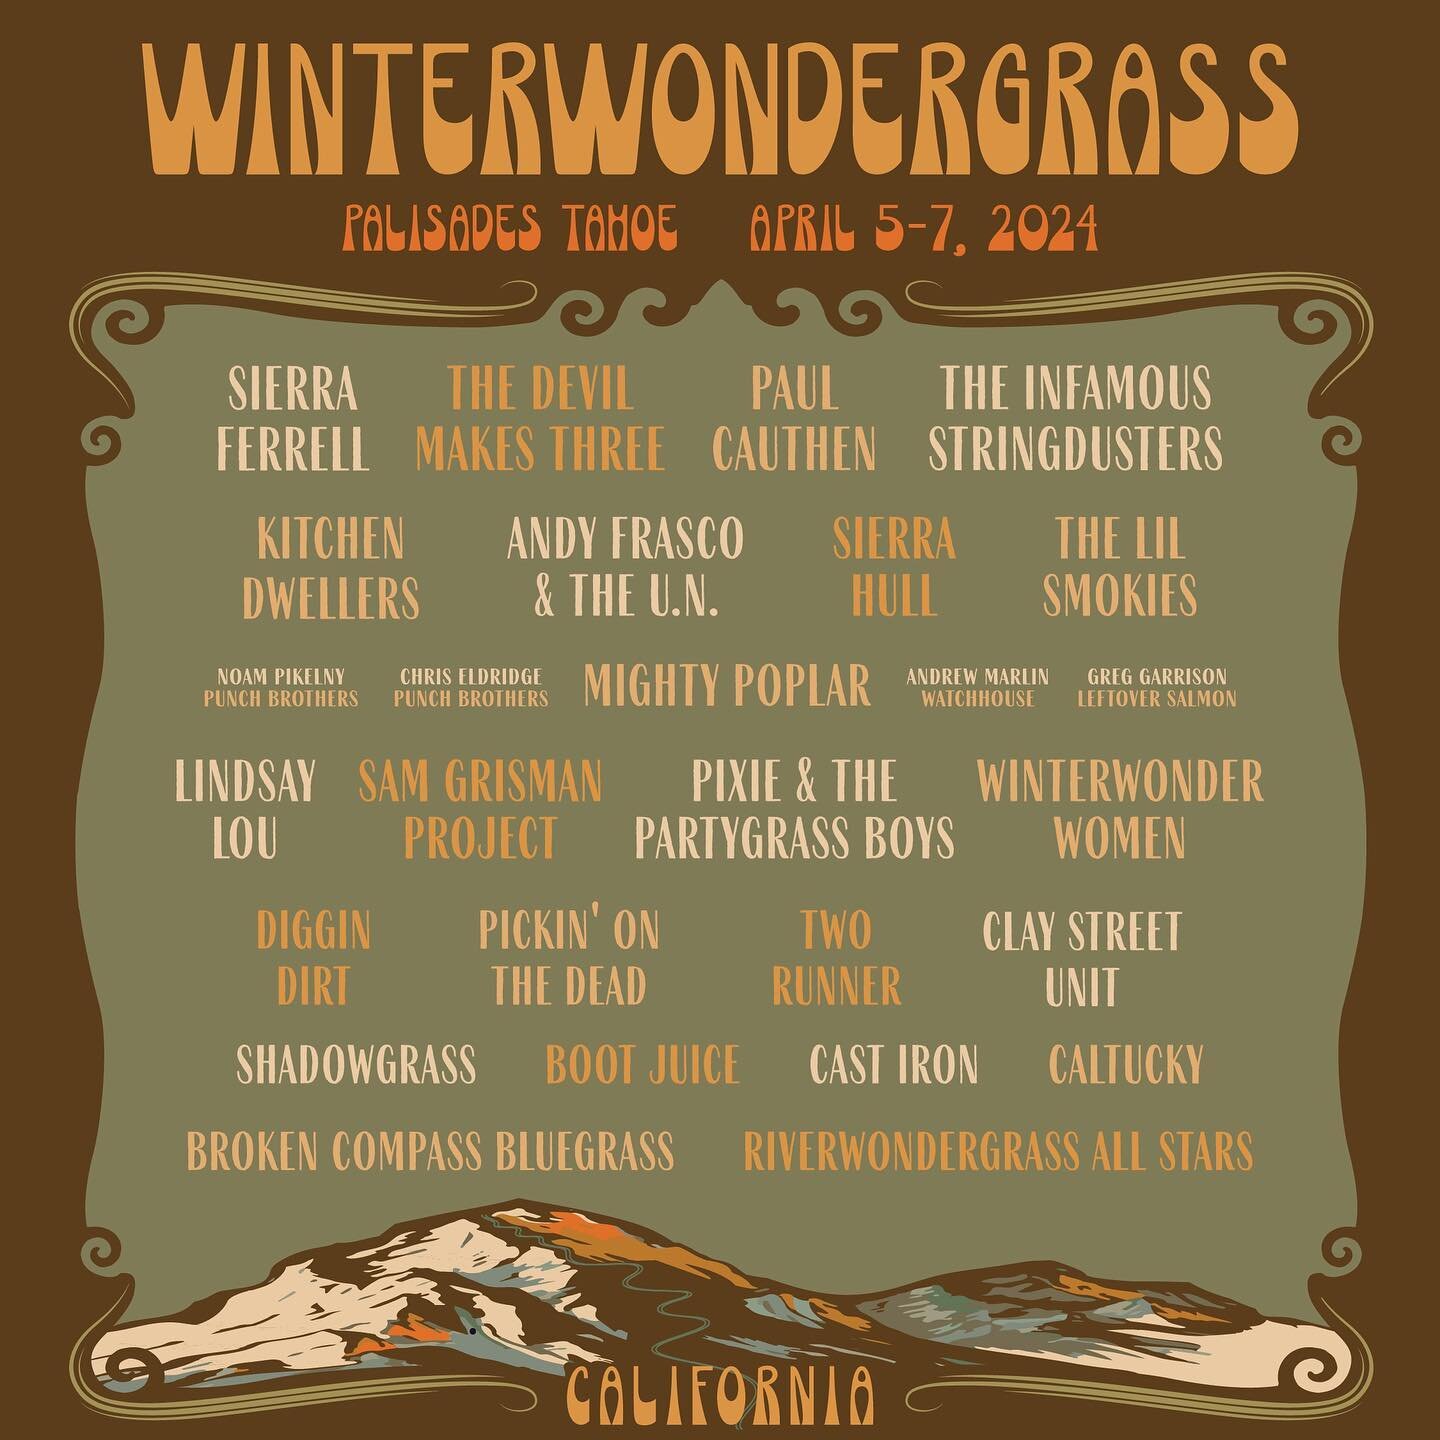 🚨WINTERWONDERGRASS GIVEAWAY!🚨

Hey California - you&rsquo;re up! 🙌🏼

Here&rsquo;s your chance to win (2) 3-day GA passes for #WinterWonderGrassTahoe2024! 

Come join us in Olympic Valley this April for some boot-stompin&rsquo; good times 🥾 🎶 🪕